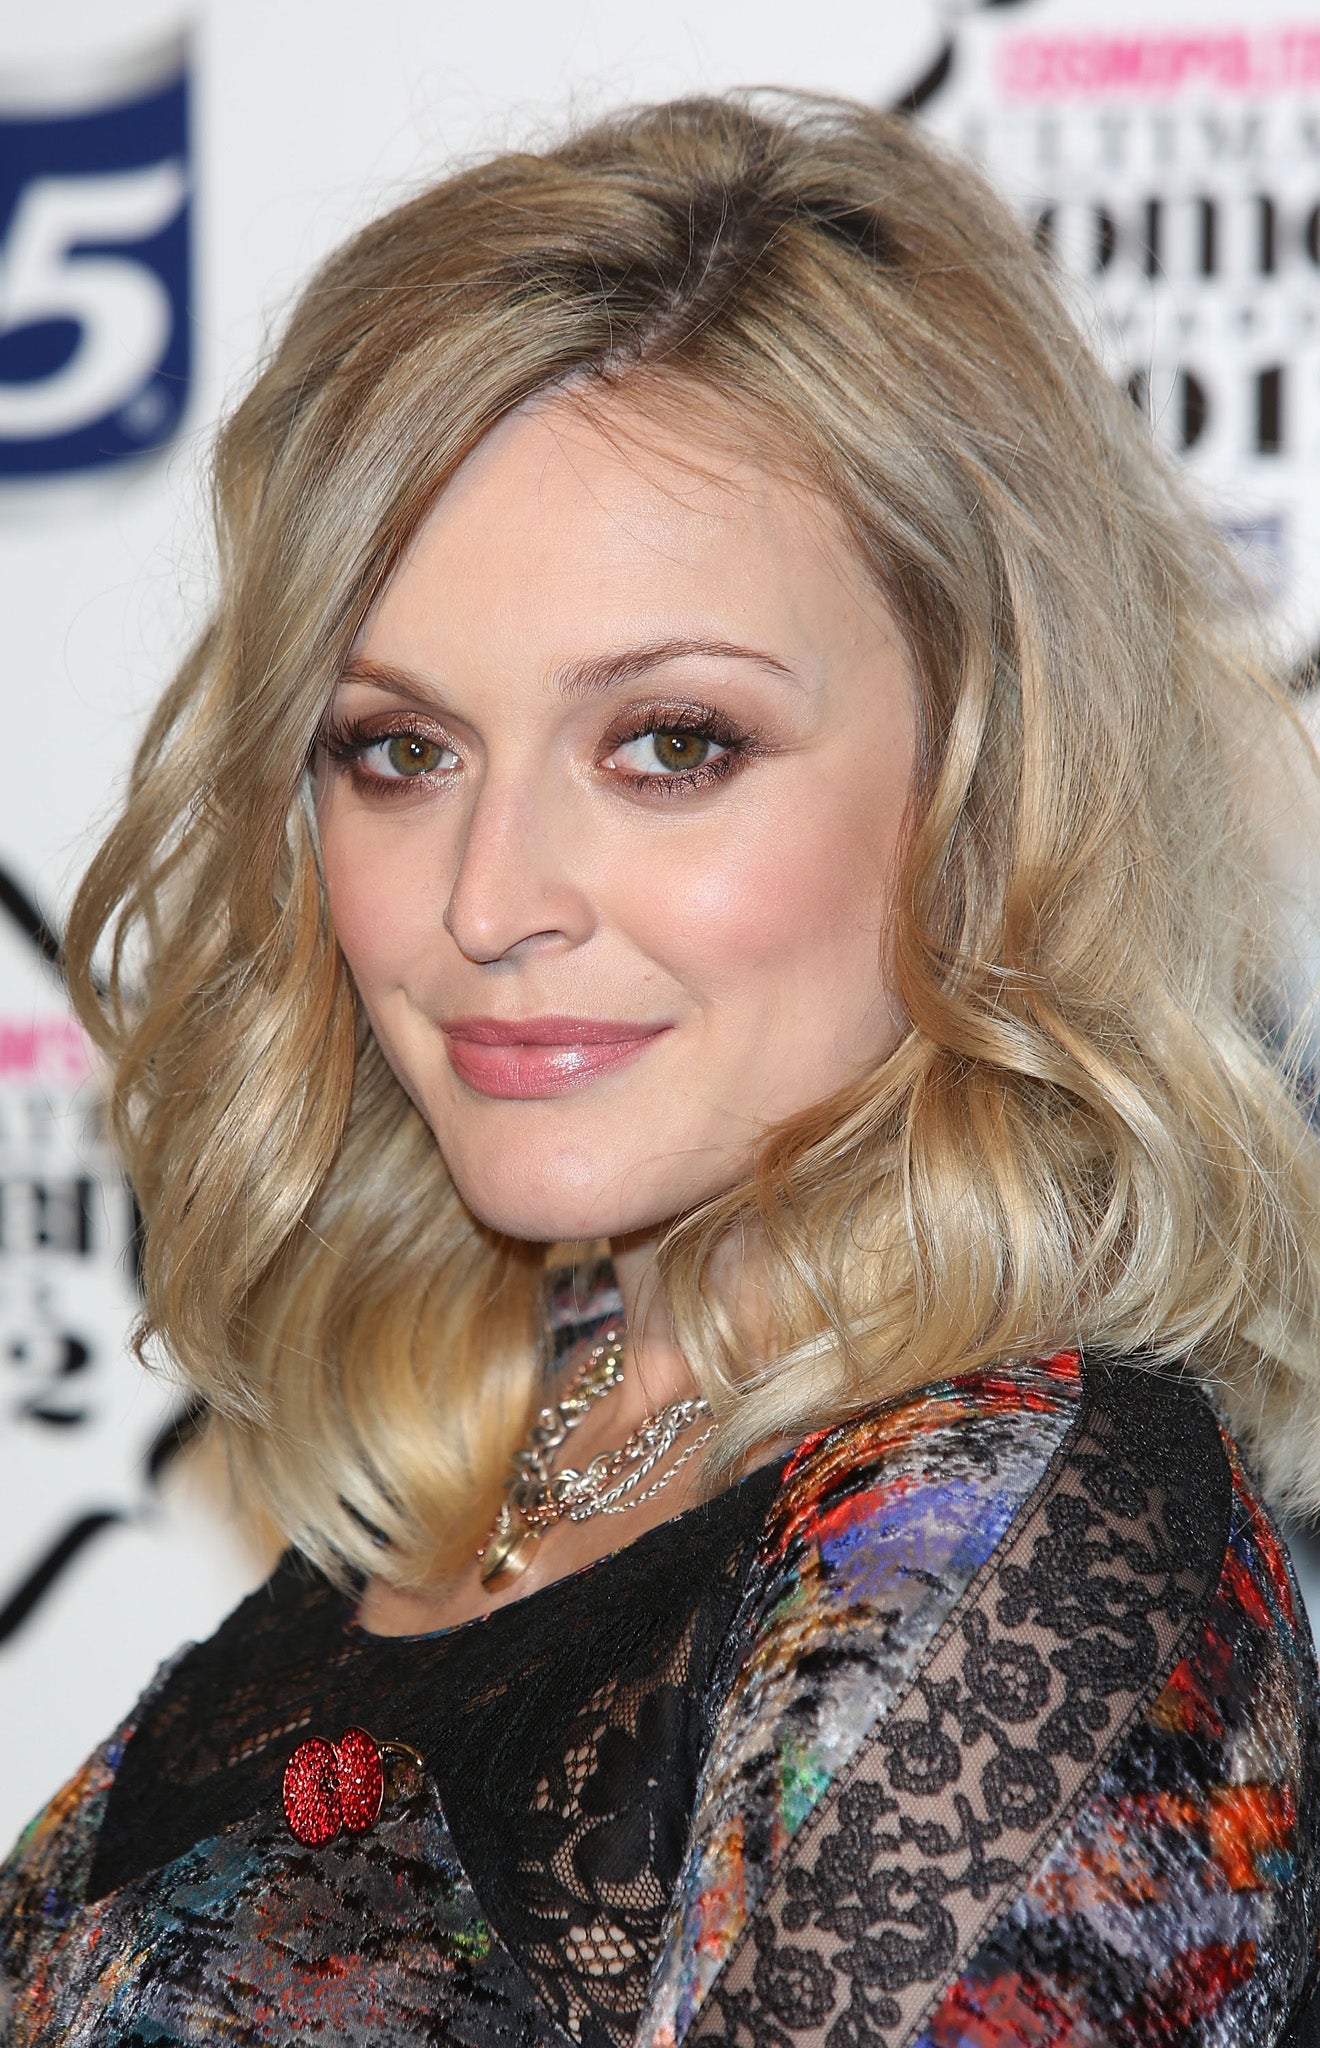 Fearne Cotton has given birth to a baby boy.